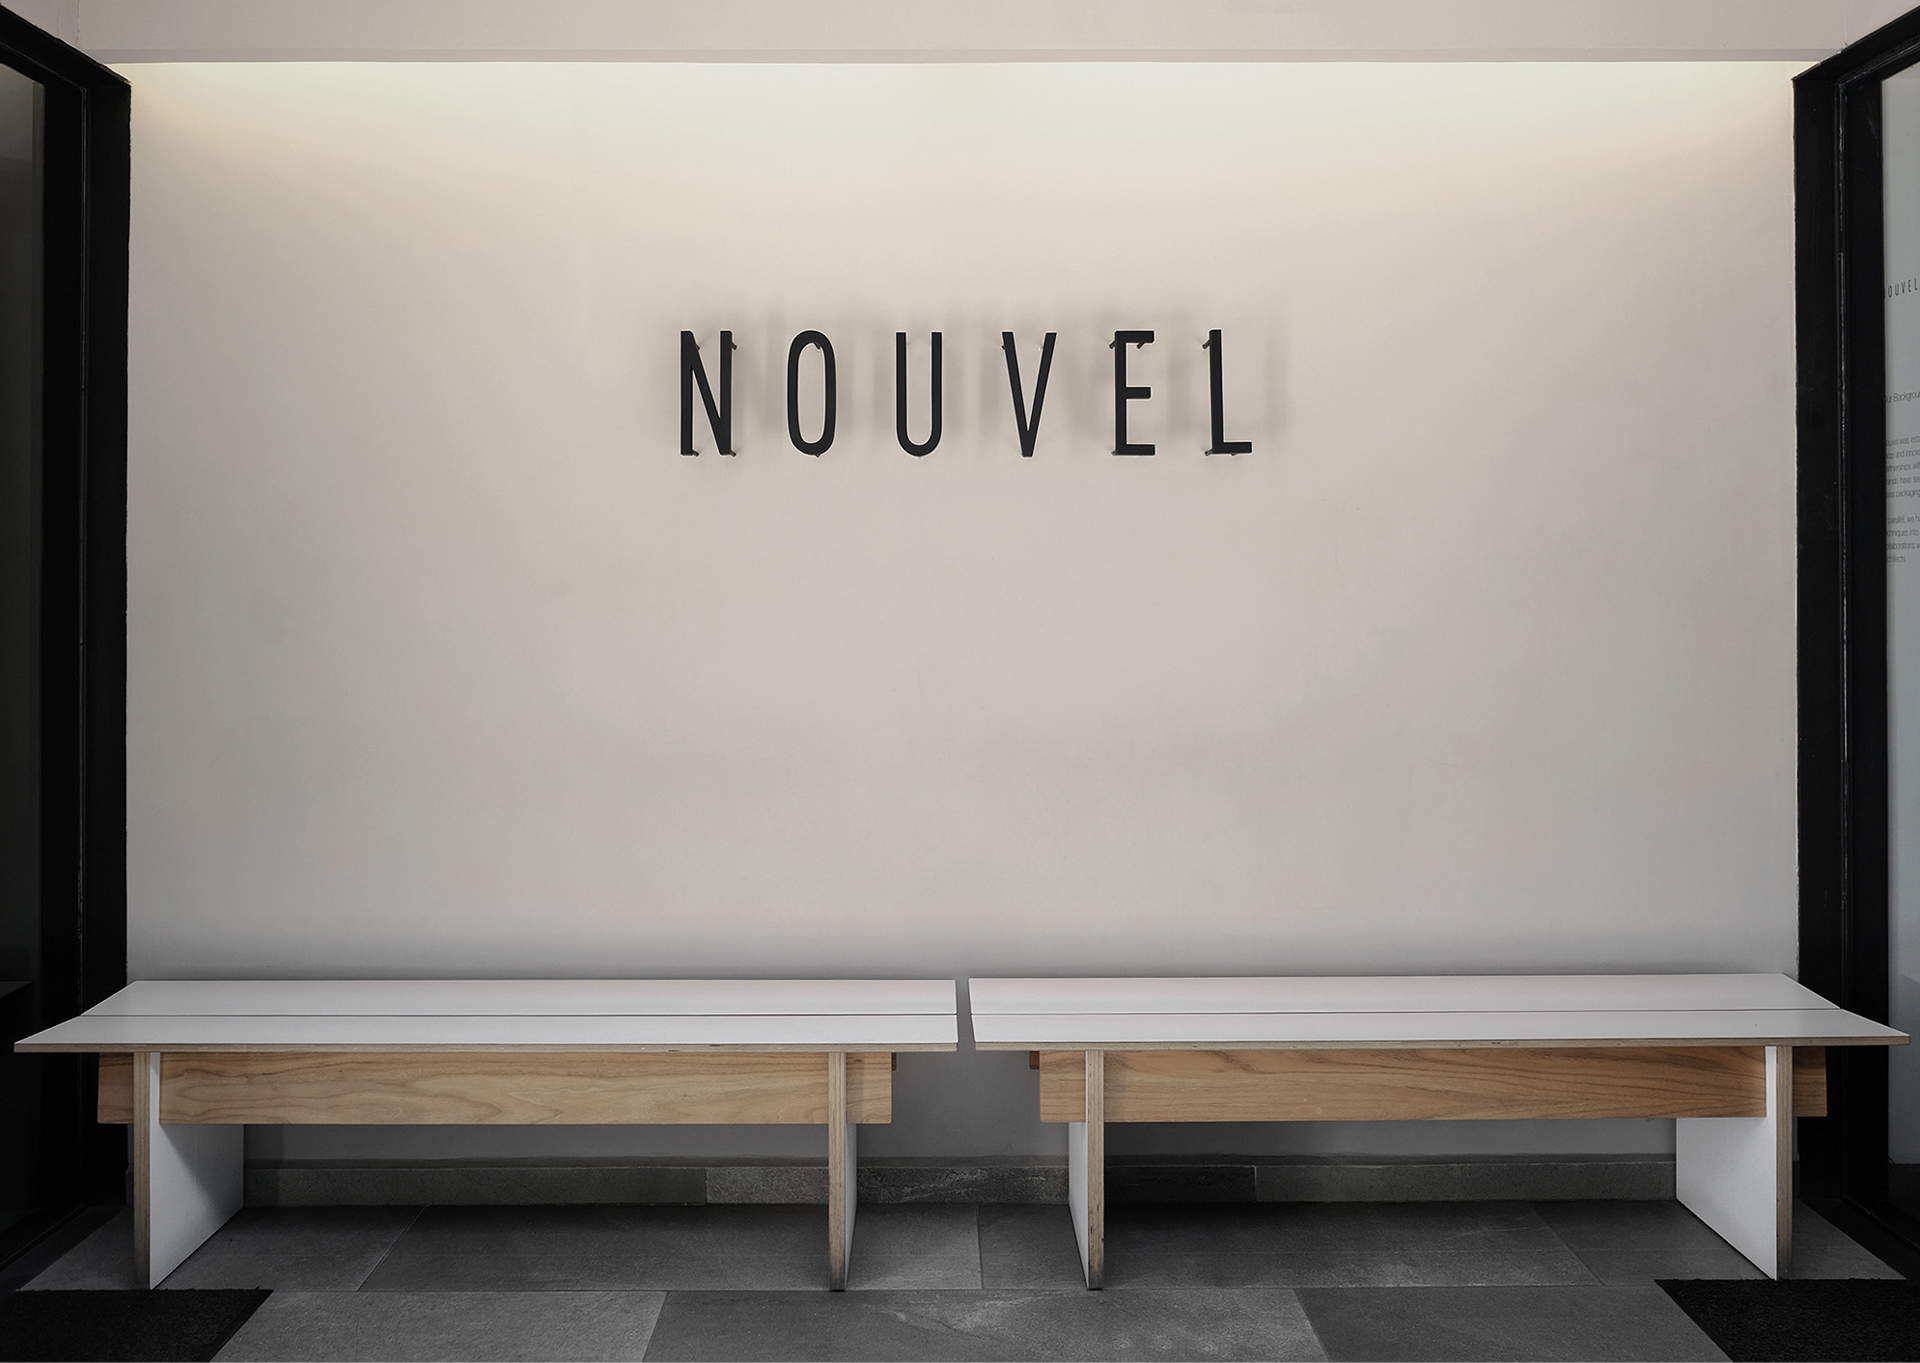 Nouvel’s New Facilities: